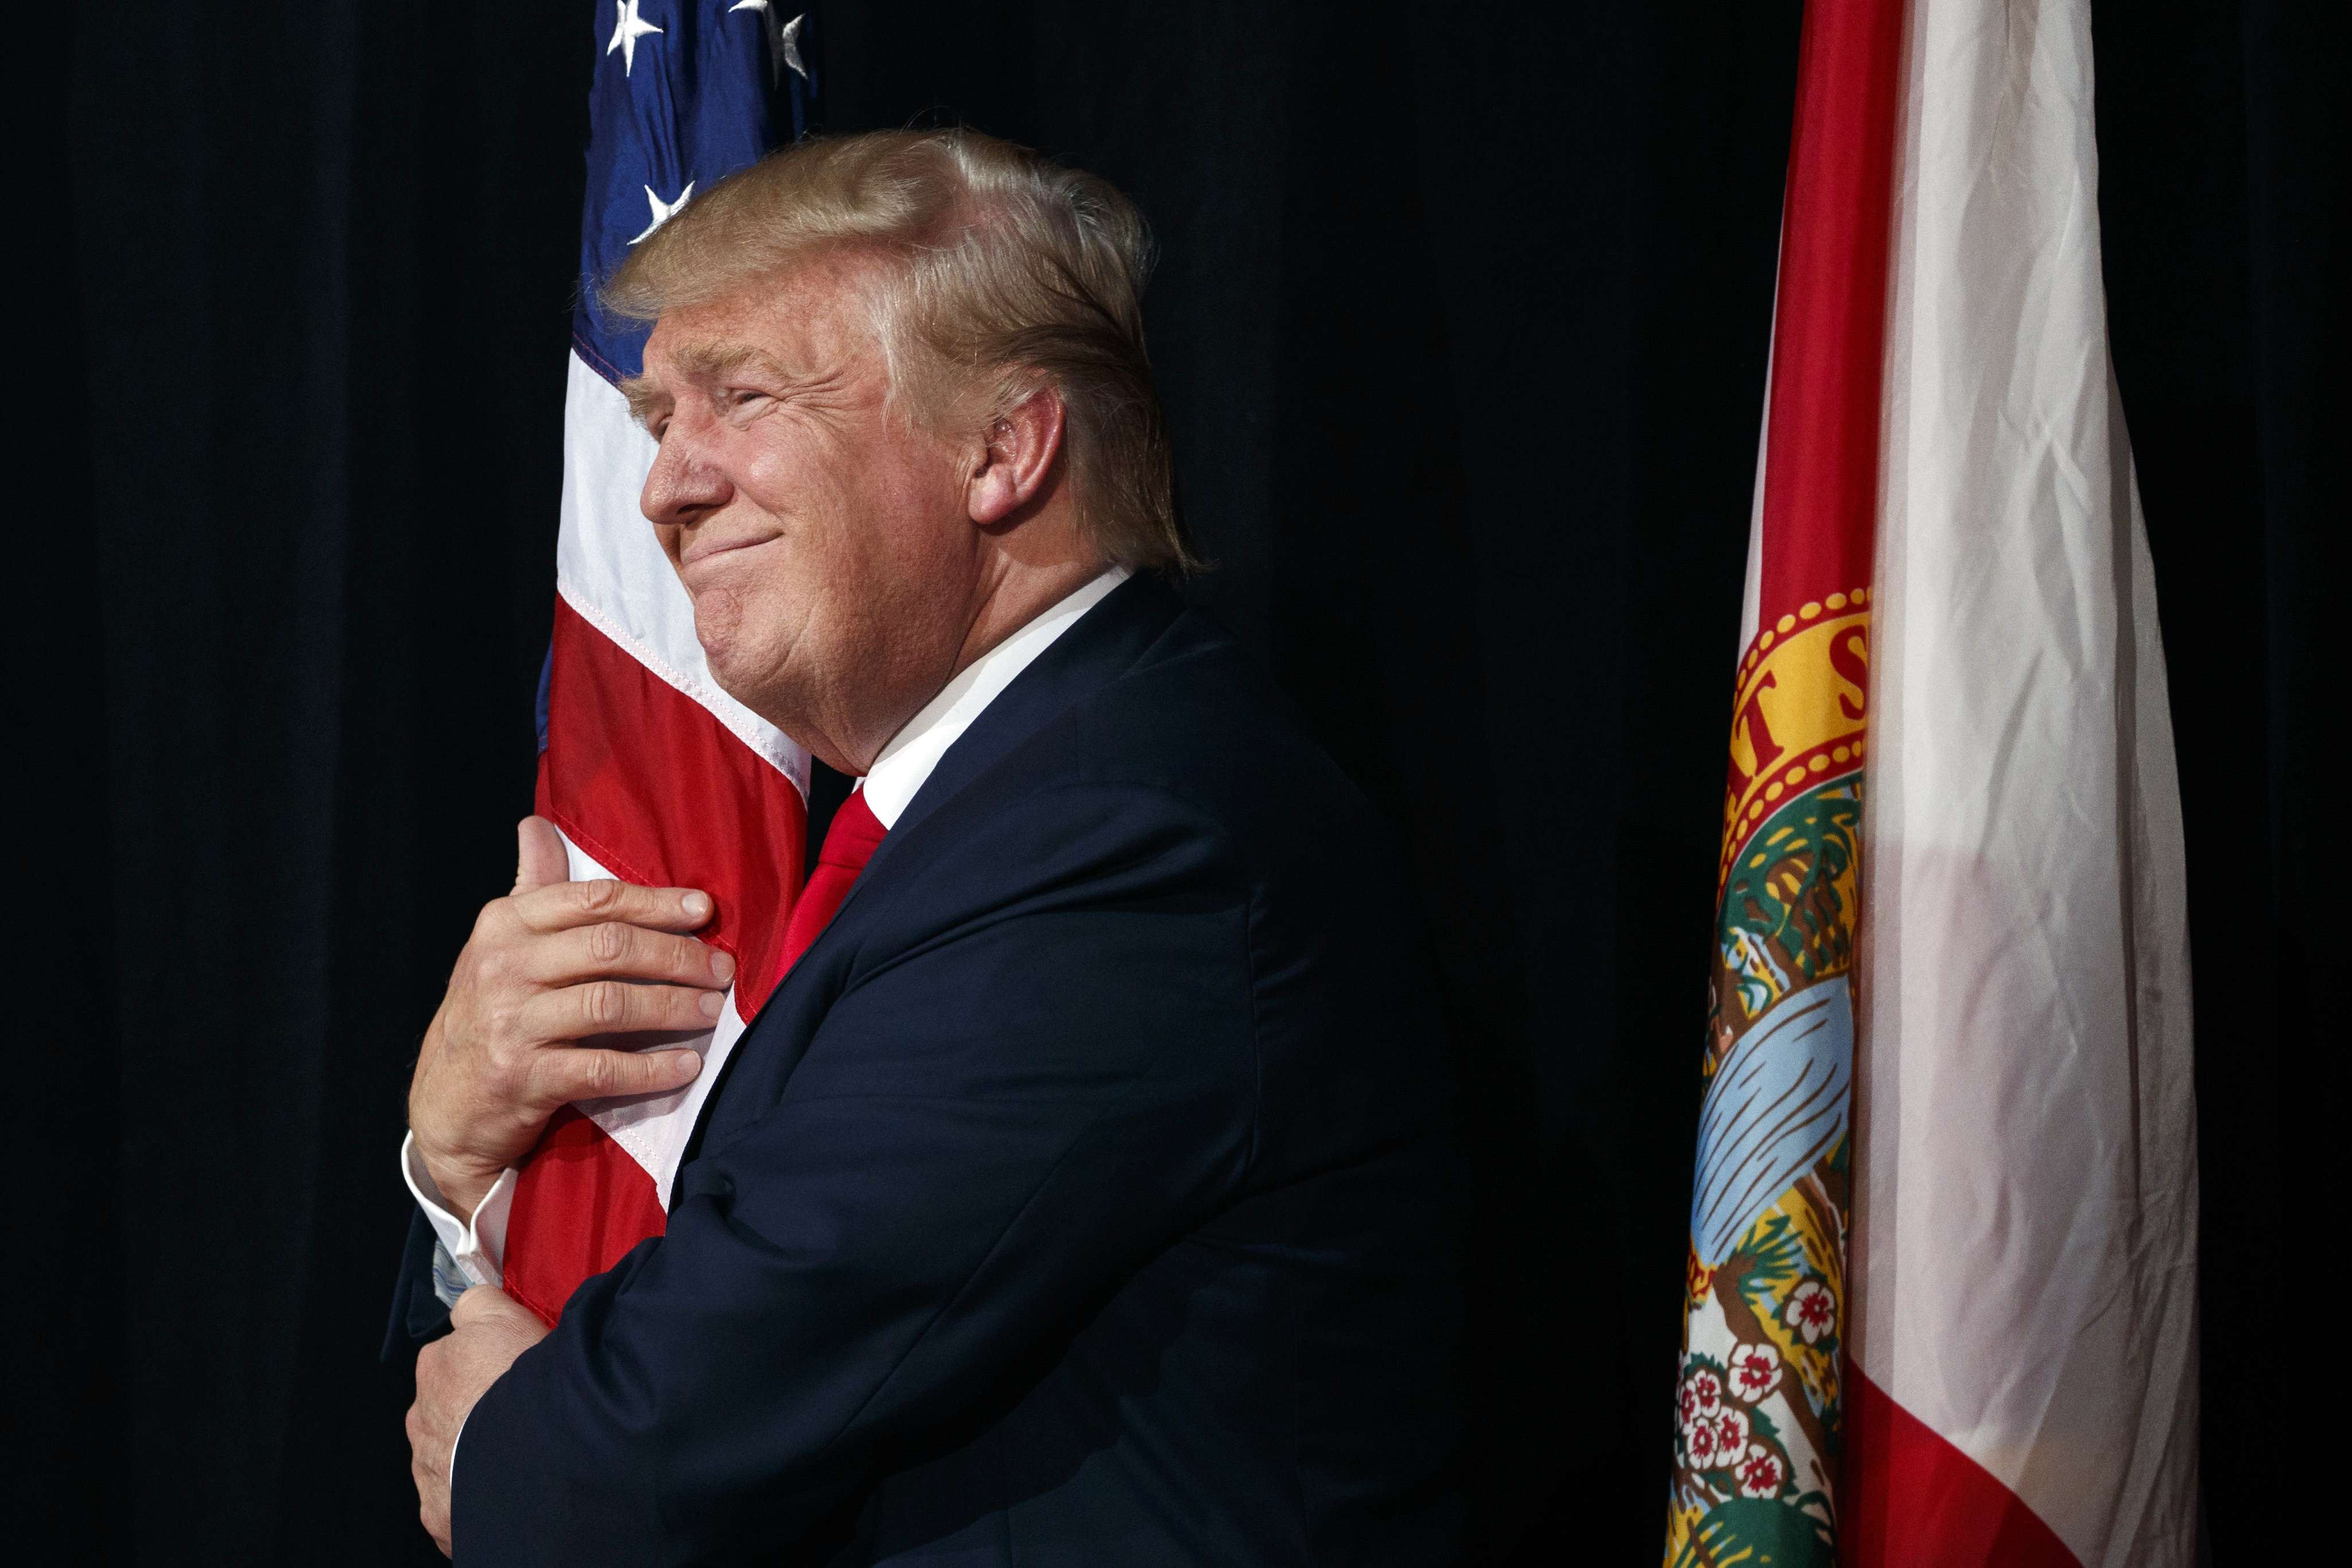 Republican presidential candidate Donald Trump hugs a the American flag as he arrives to speak to a campaign rally last month in Tampa, Florida. Photo: AP